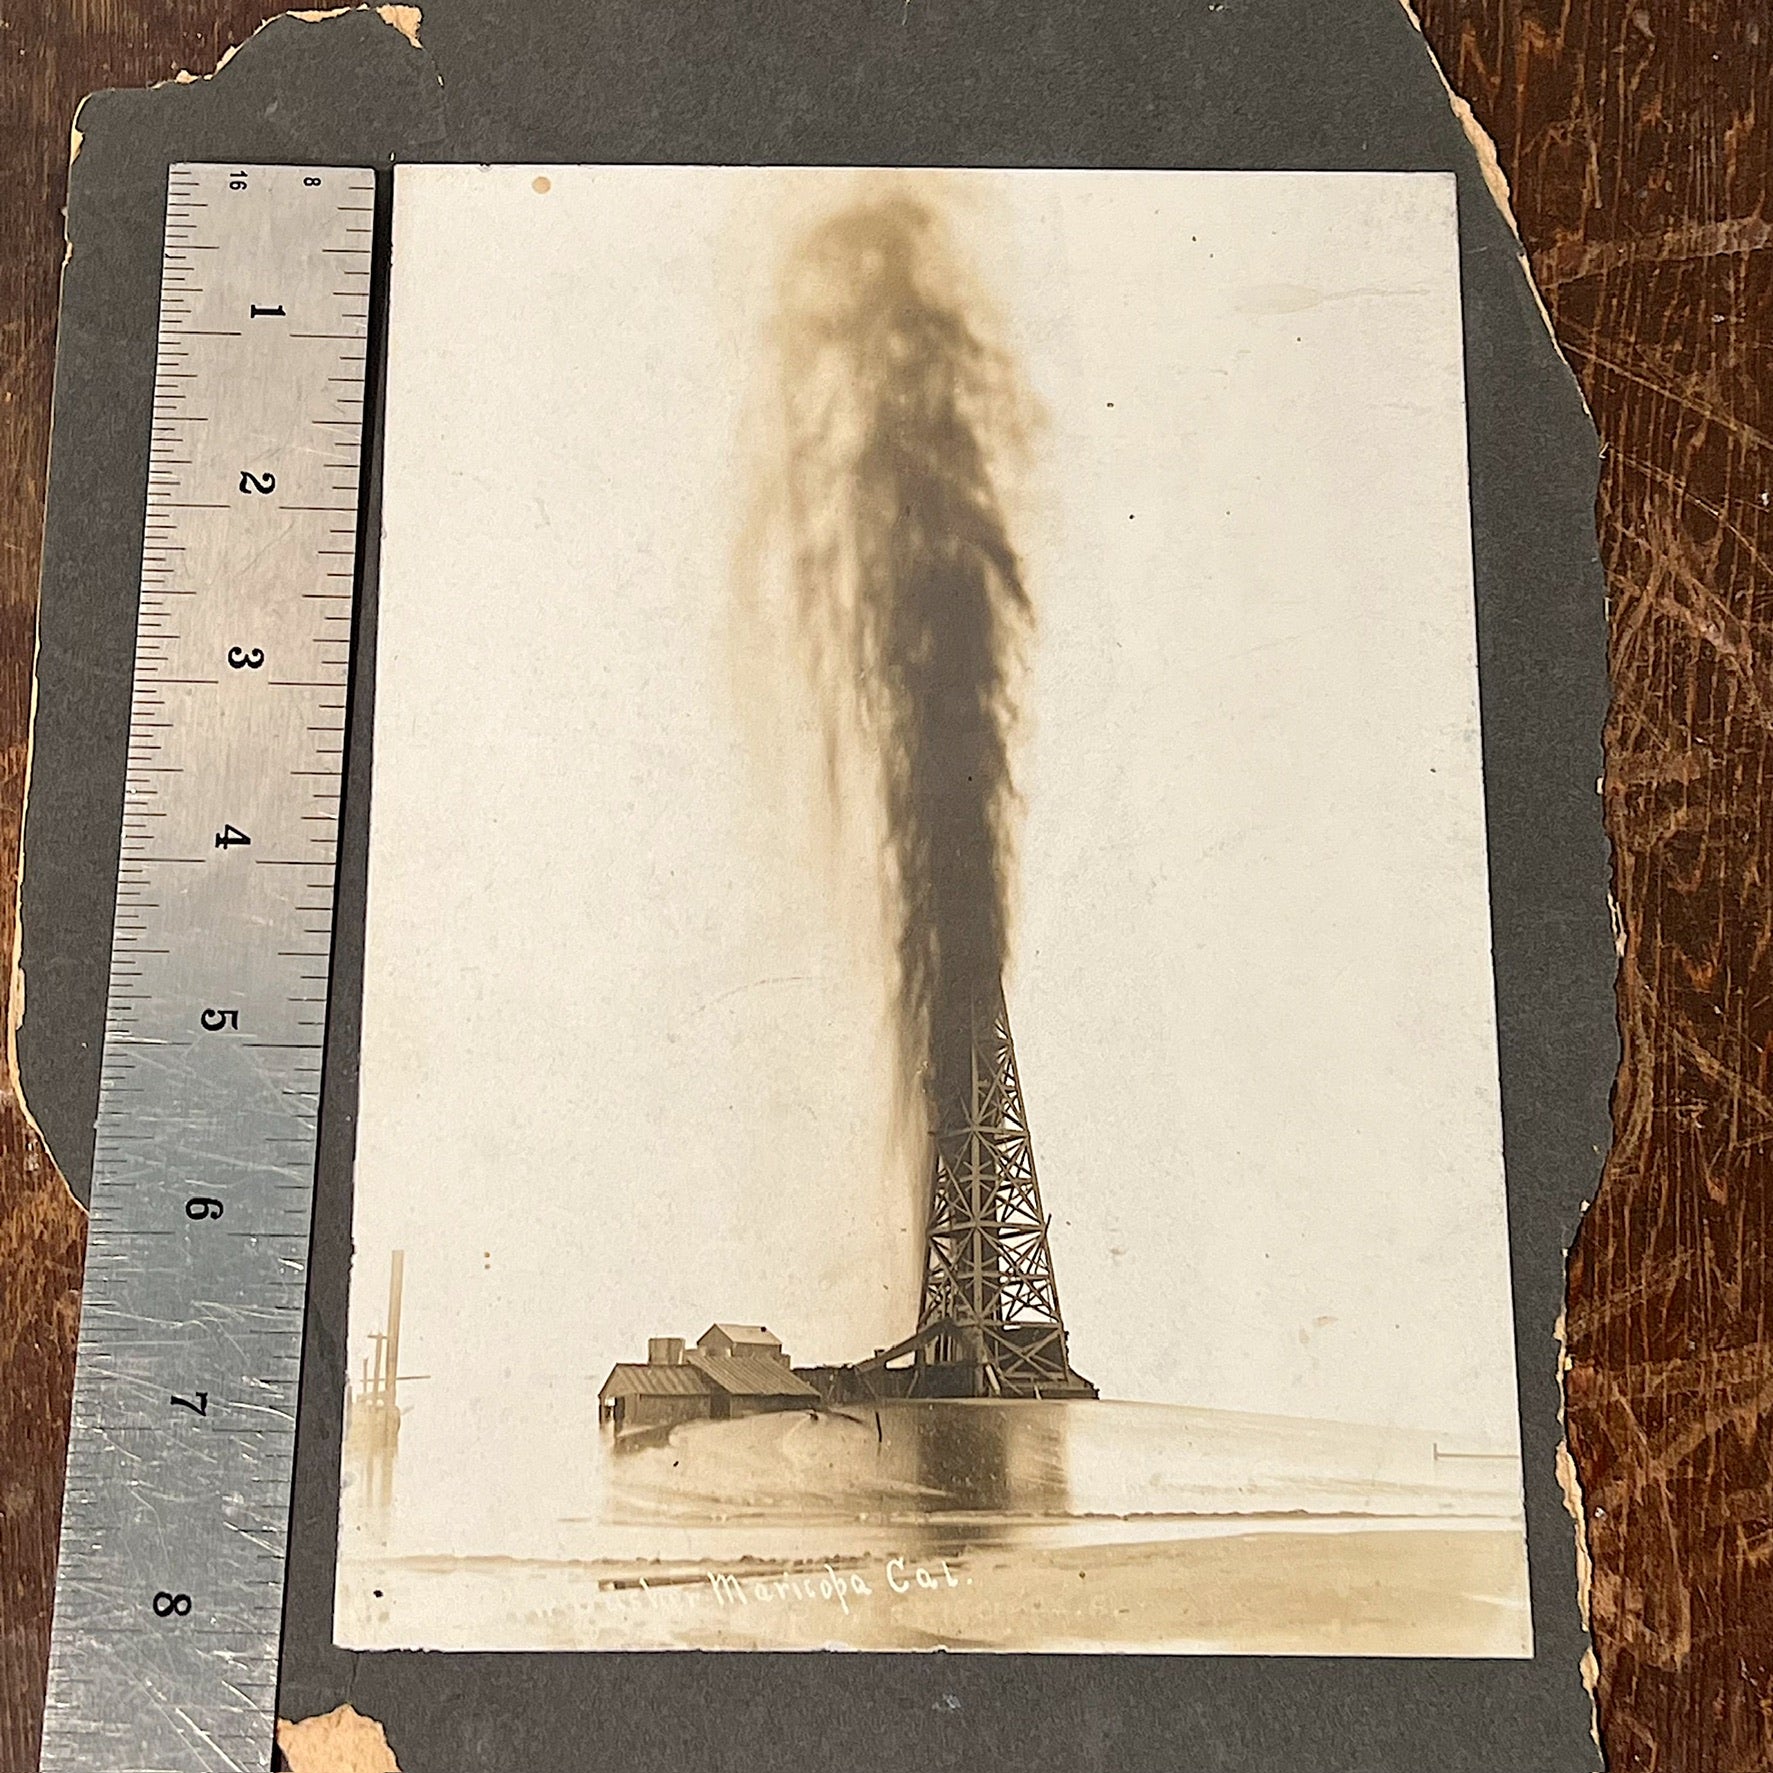 Antique Oil Gusher Photograph from Maricopa California